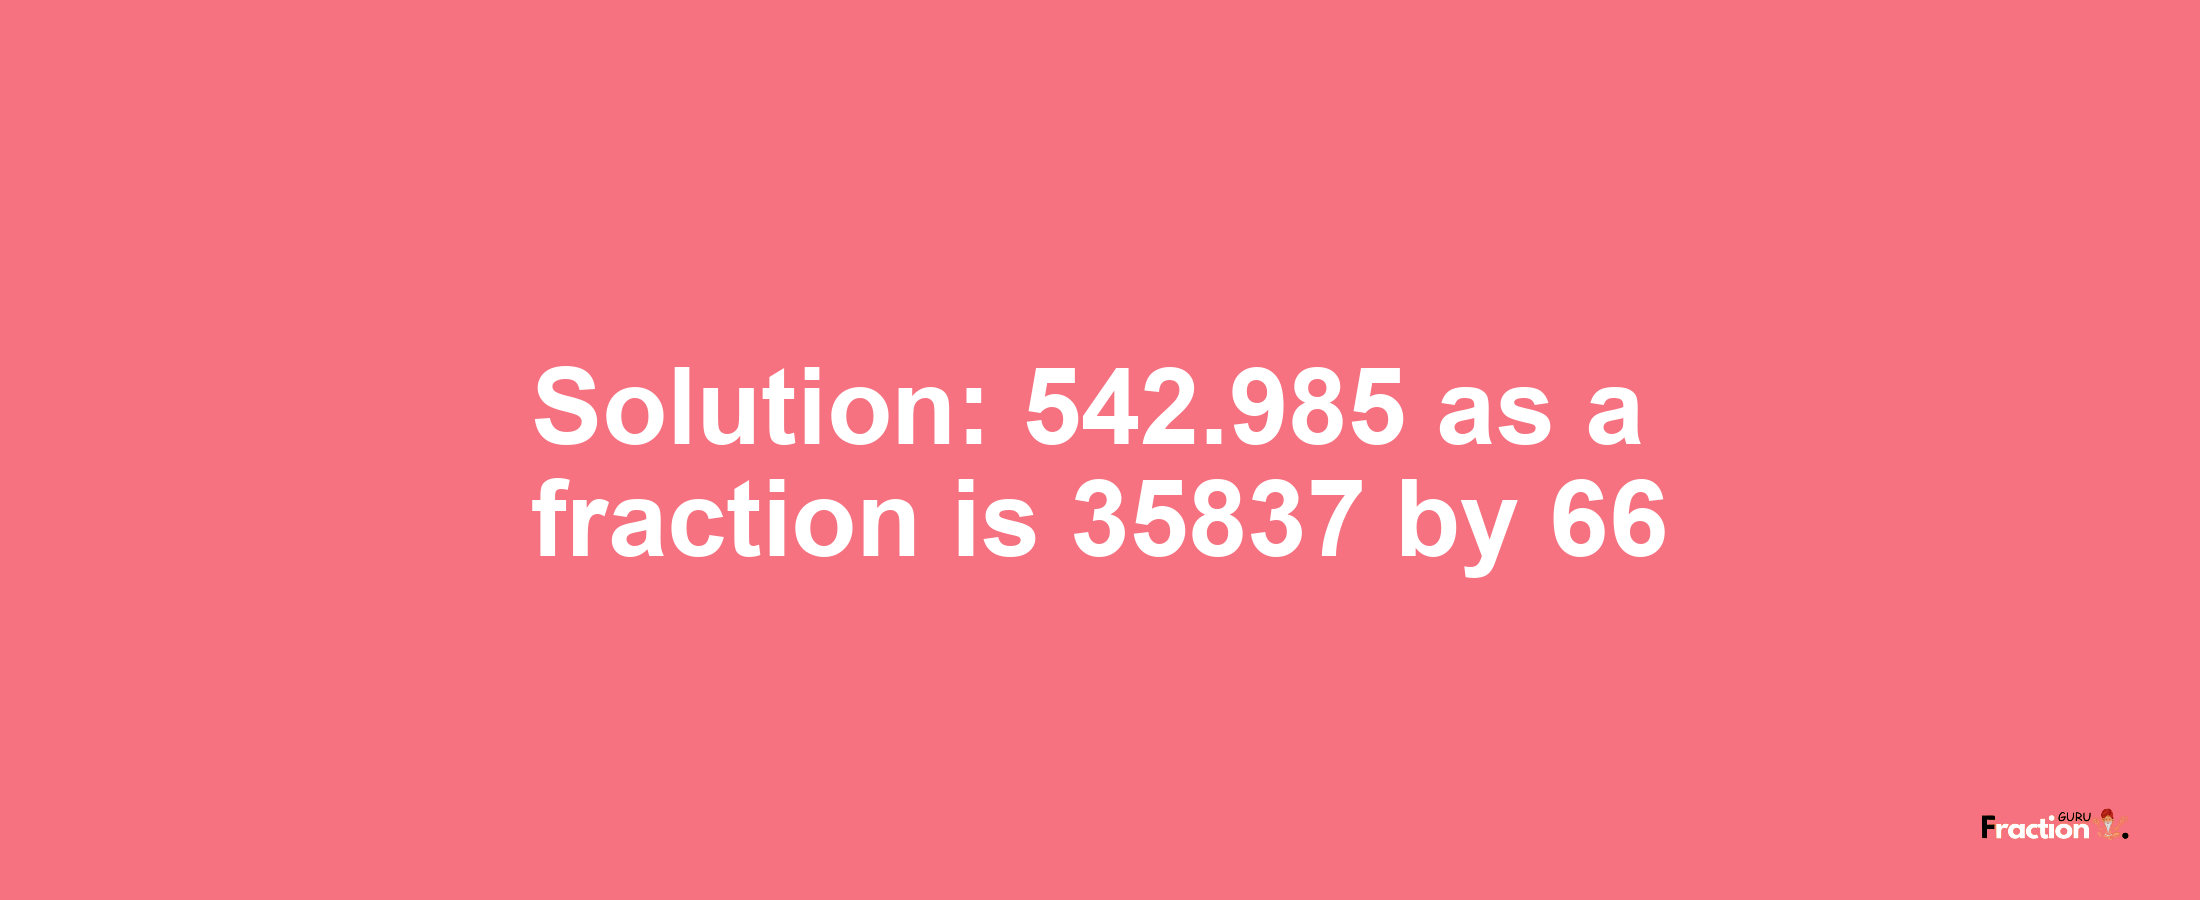 Solution:542.985 as a fraction is 35837/66